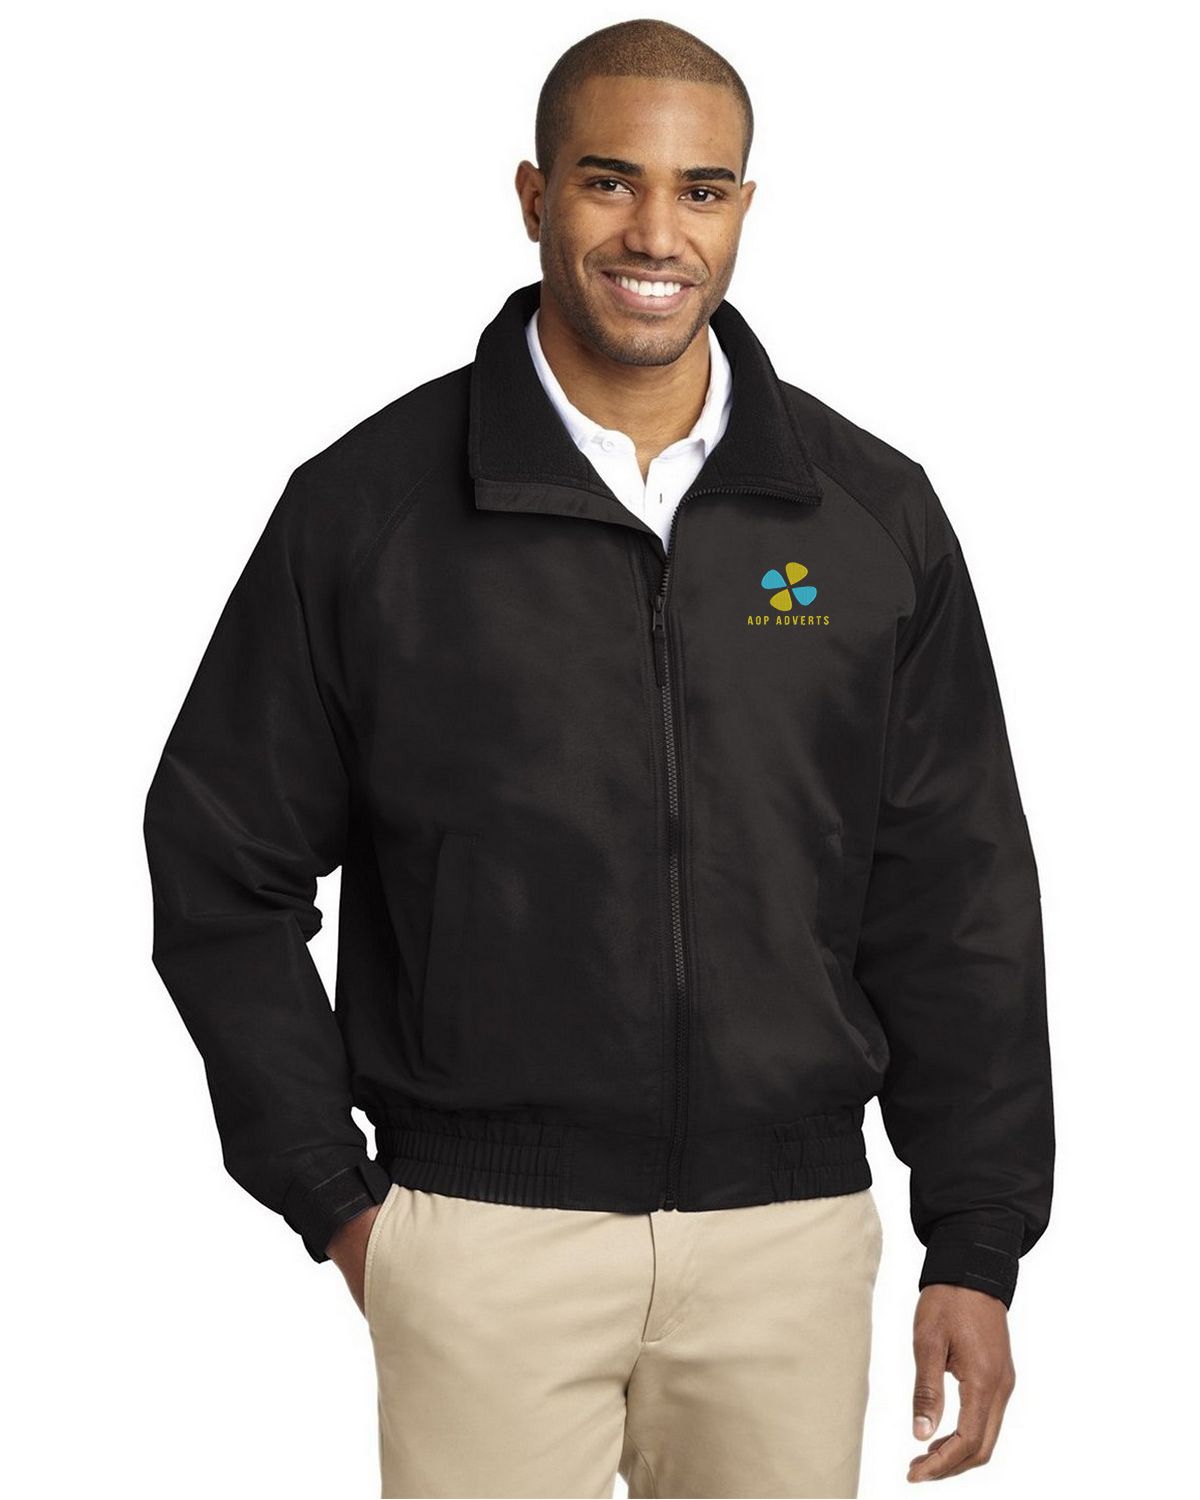 Port Authority J329 Lightweight Charger Jacket